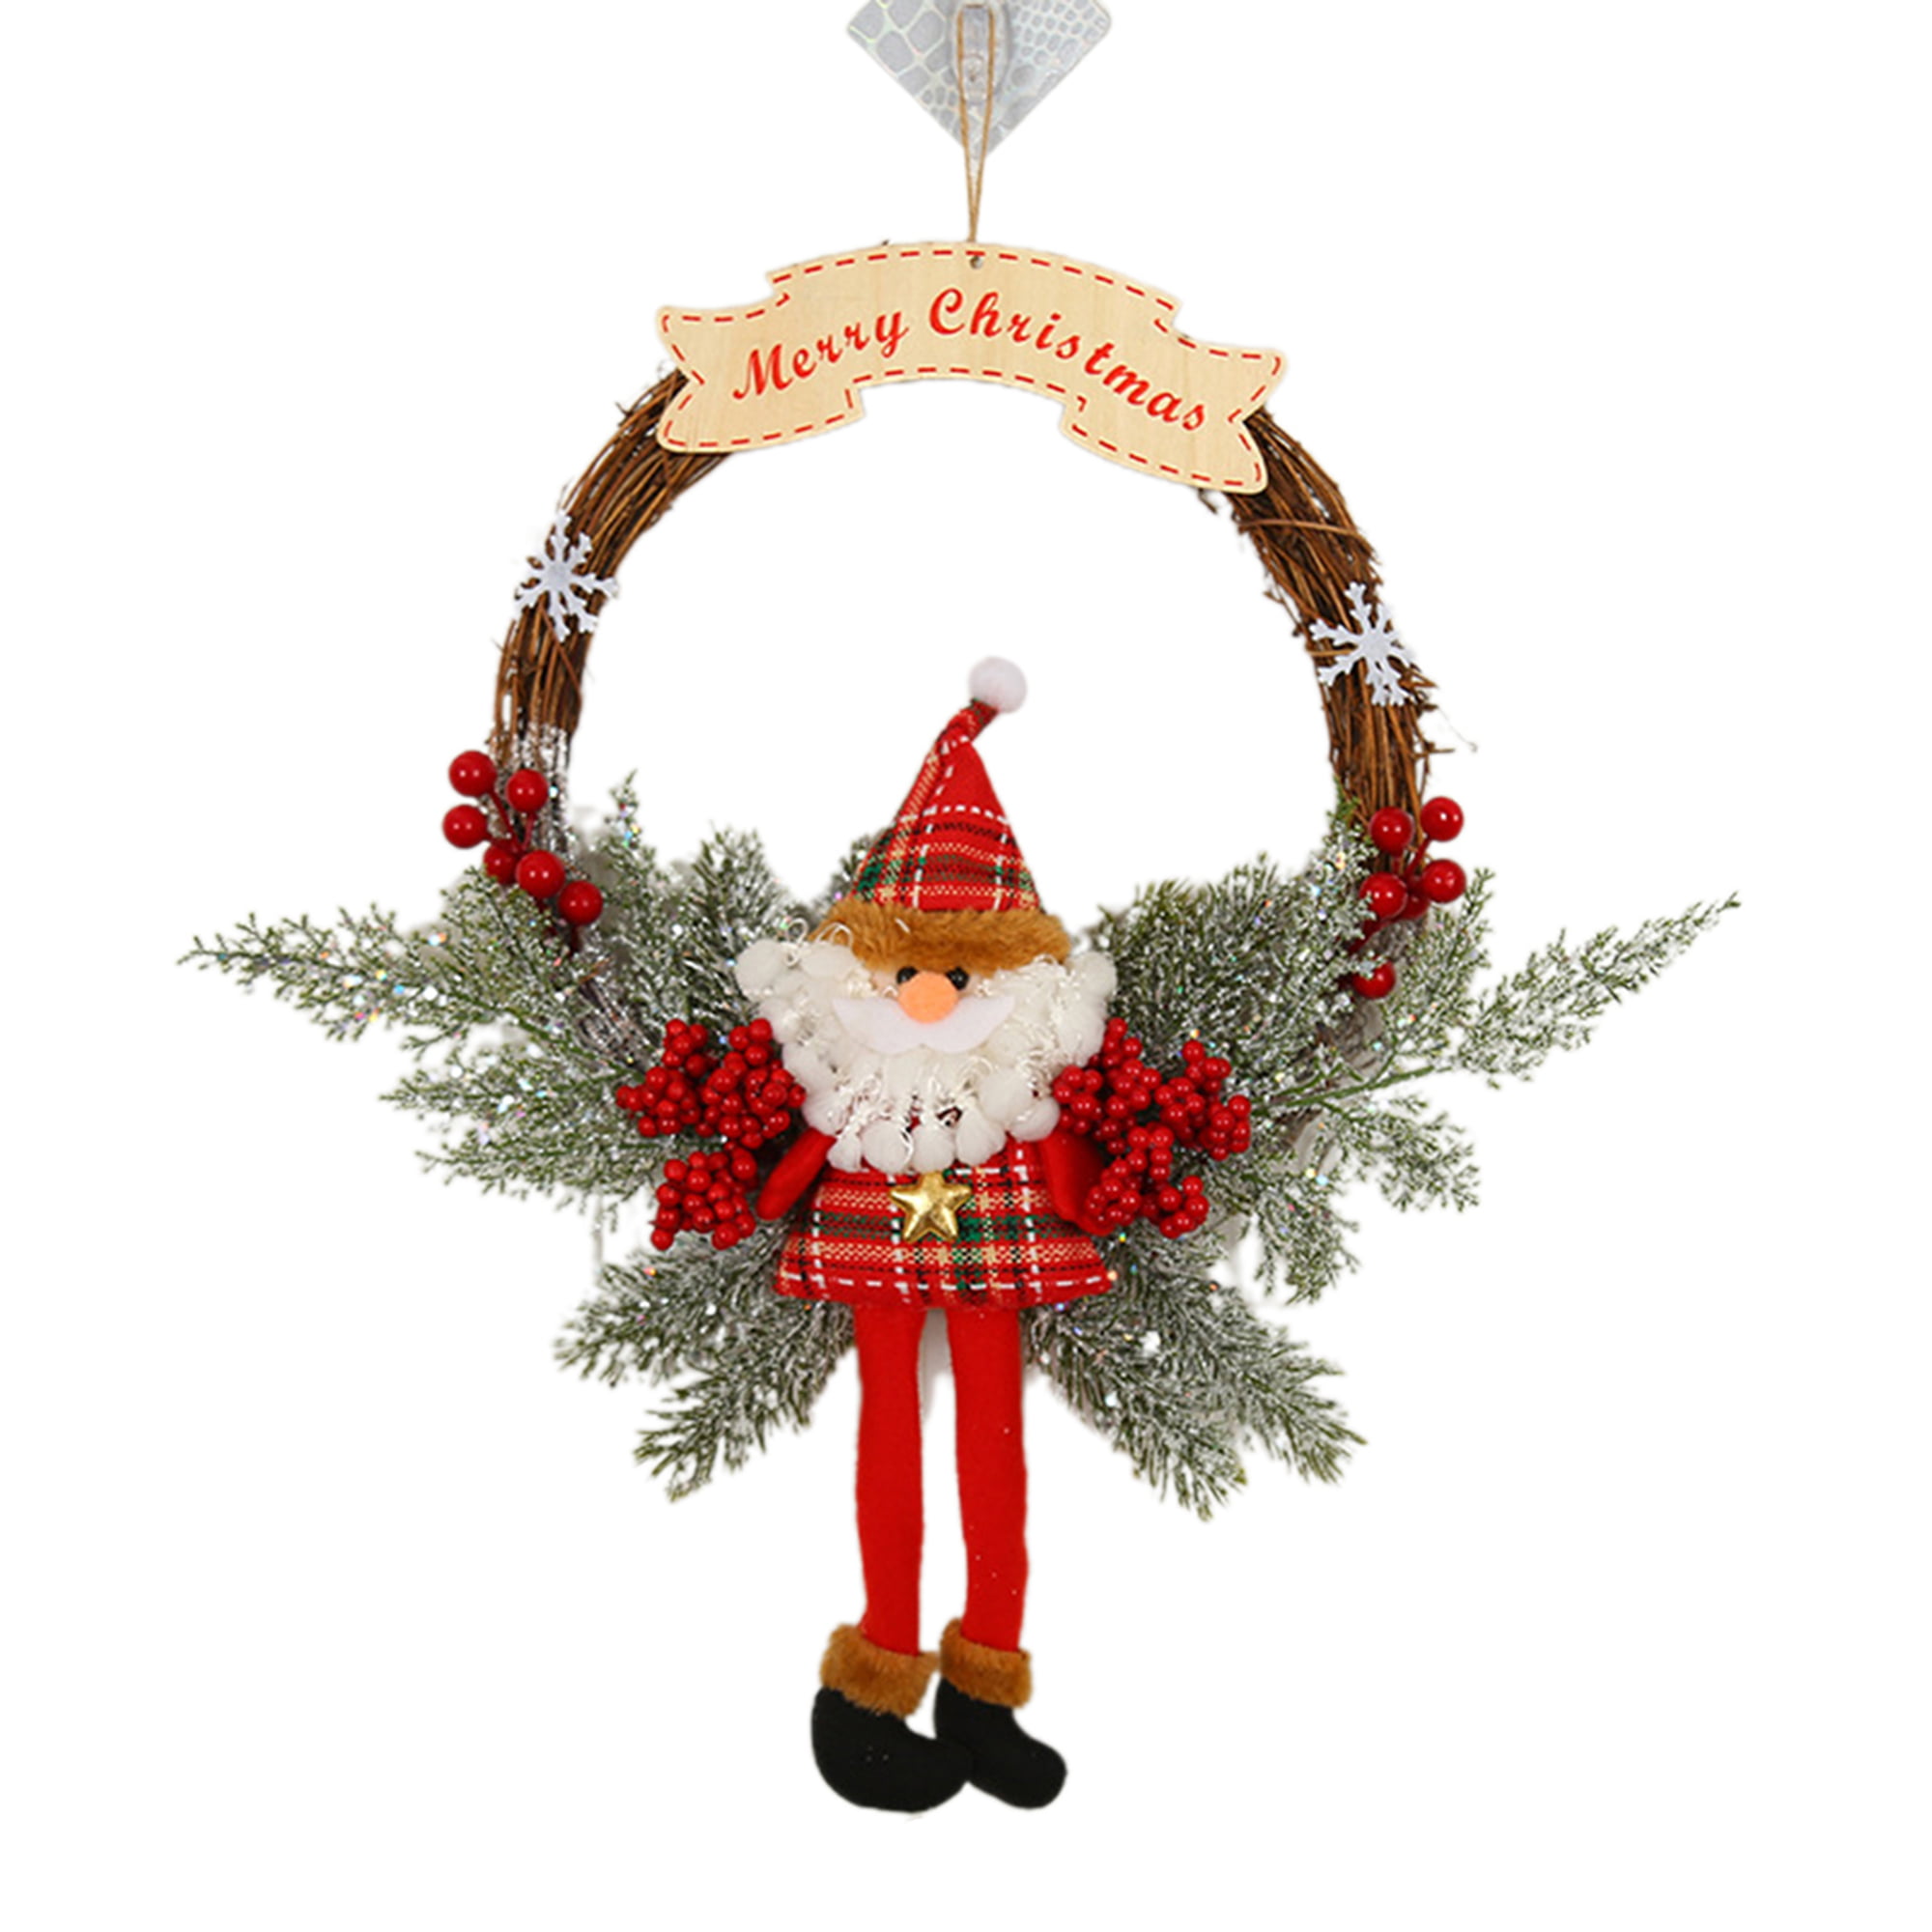 Christmas Wreath Santa Wreath Holiday Wreath Merry and Bright Green Red Deer front Door Decor Free Shipping